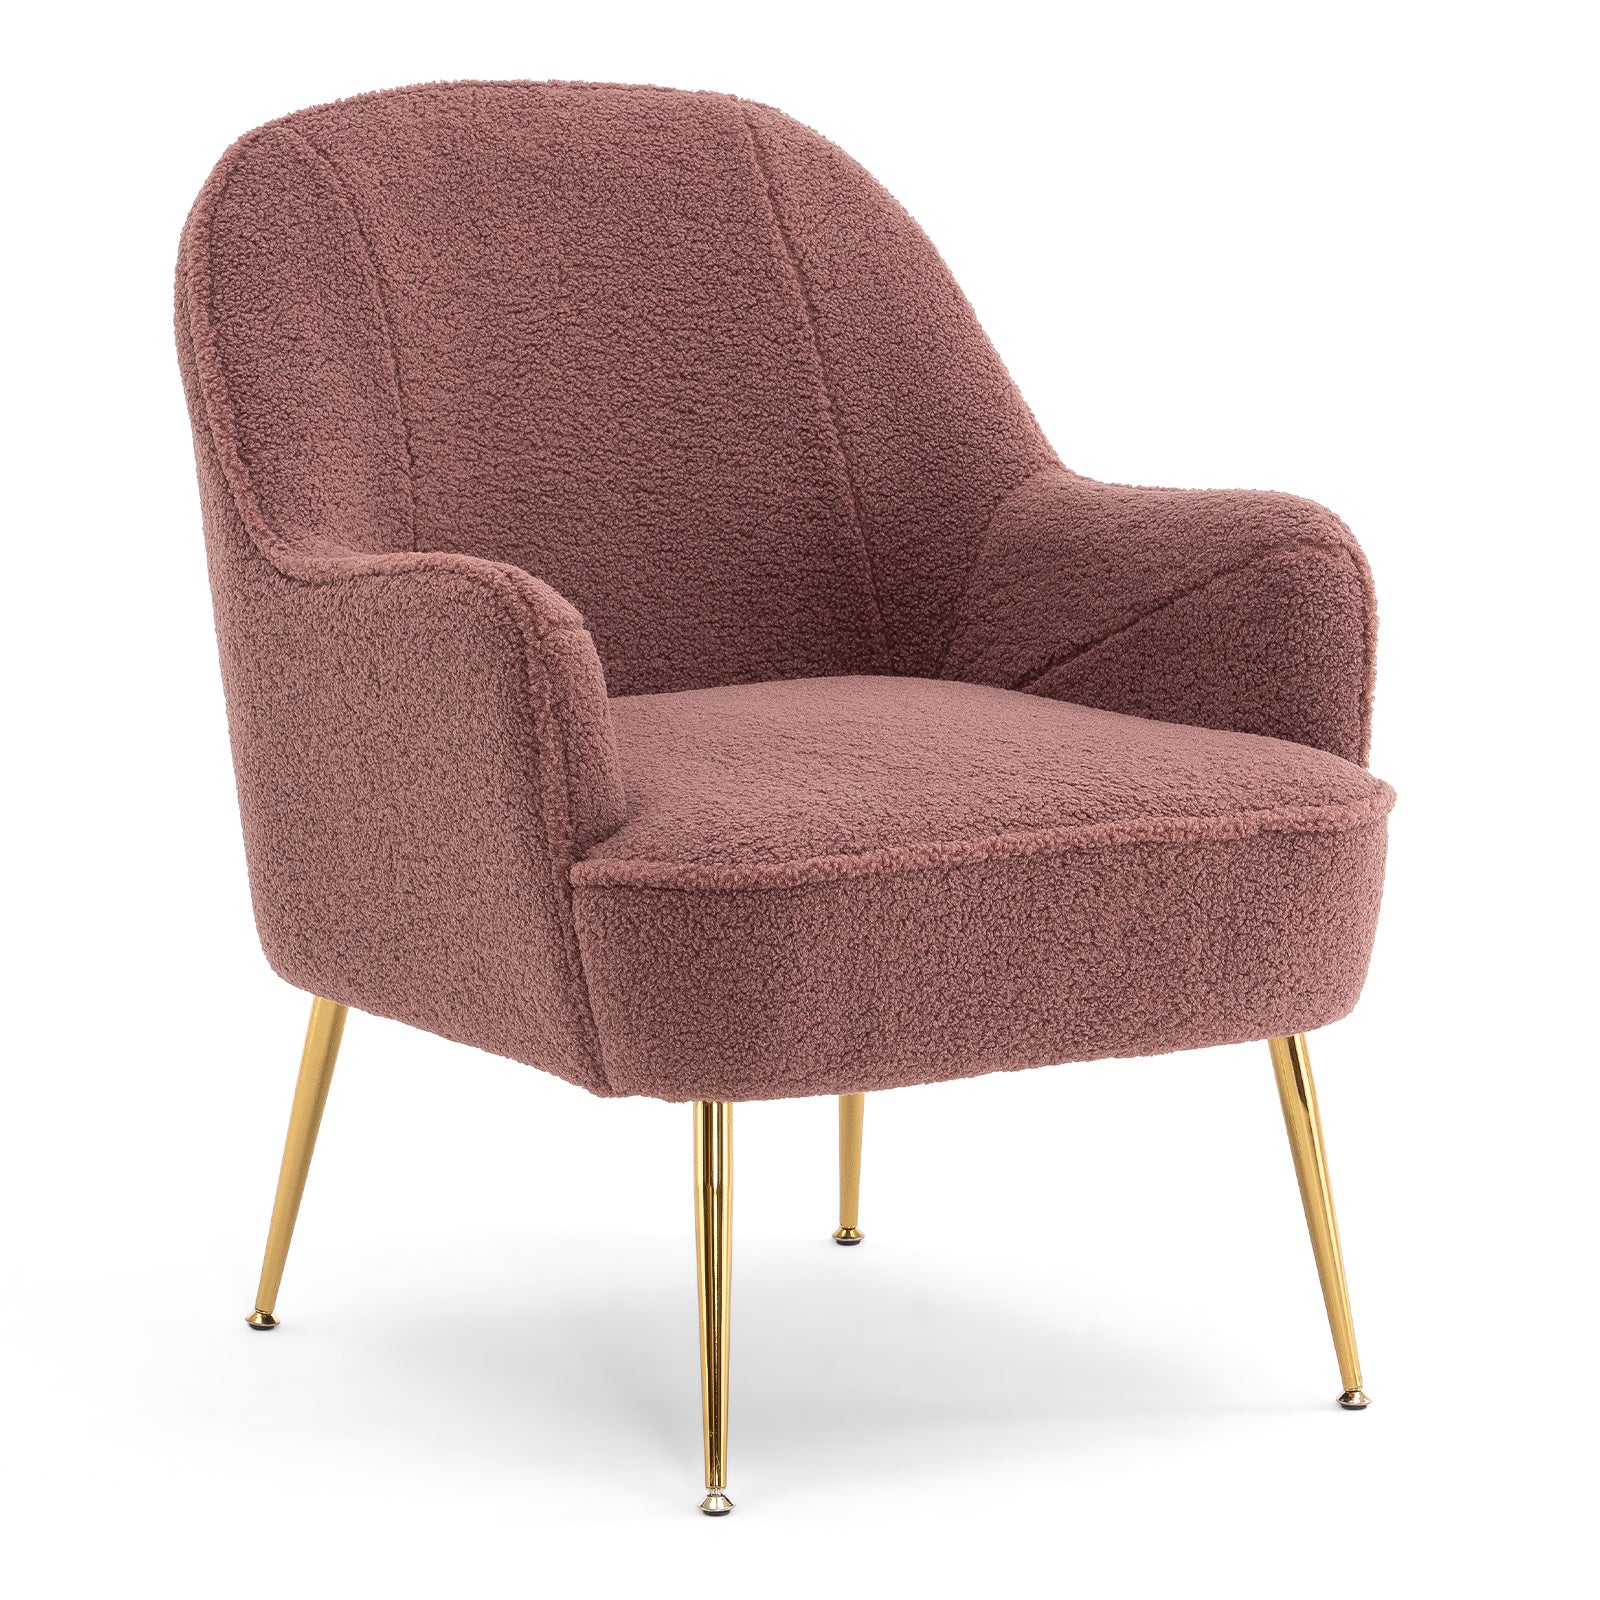 001-Modern Soft Teddy Fabric Accent Chair With Gold Metal Legs For Indoor,Red